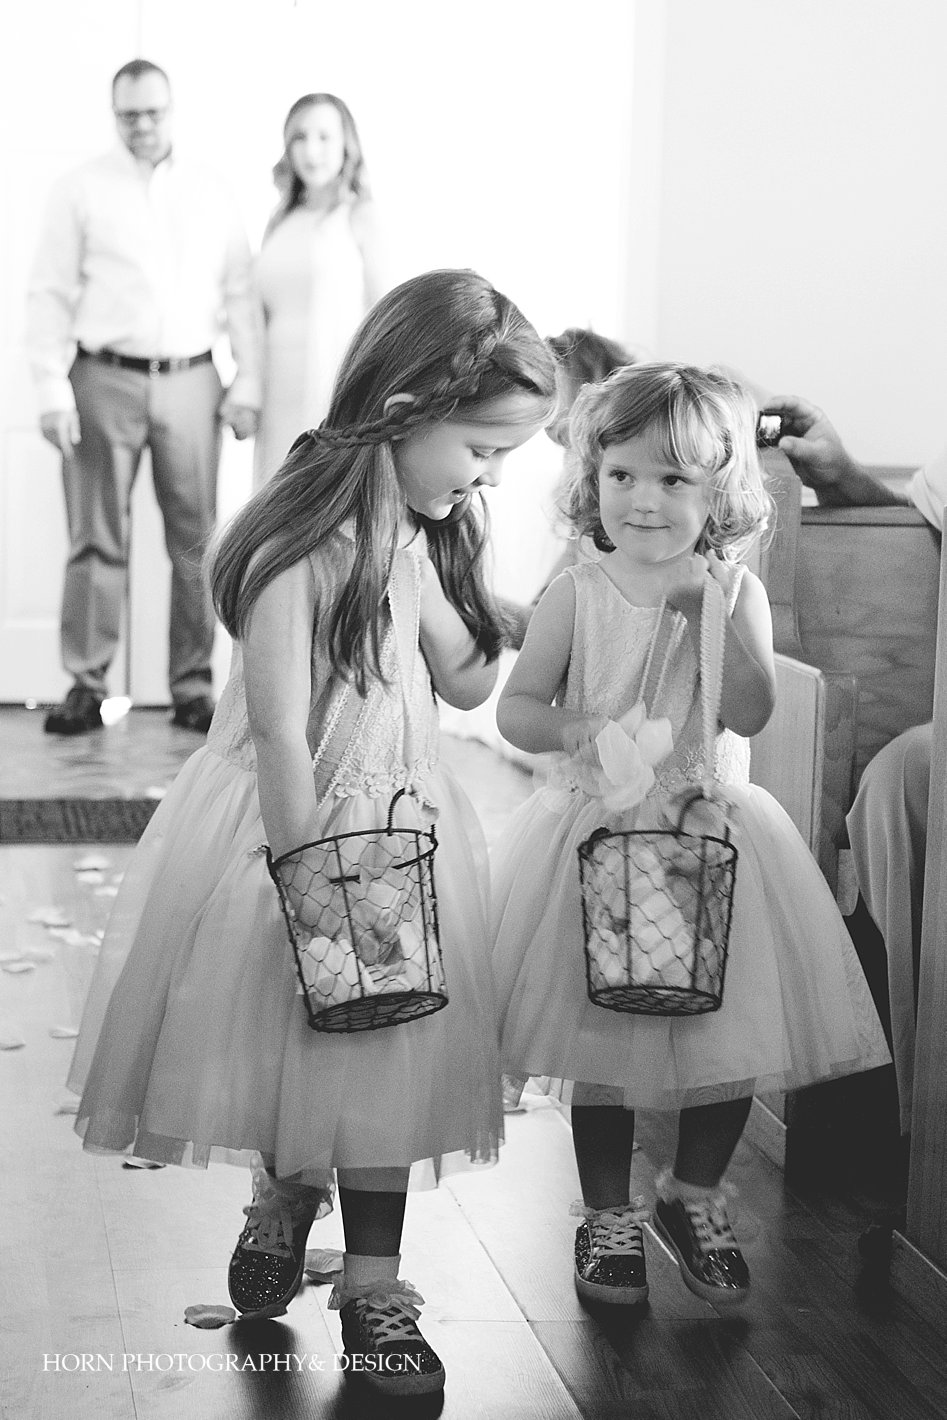 flower girls at wedding 20 Year Vow Renwal R- Ranch Dahlonega husband and wife Horn photography and Design